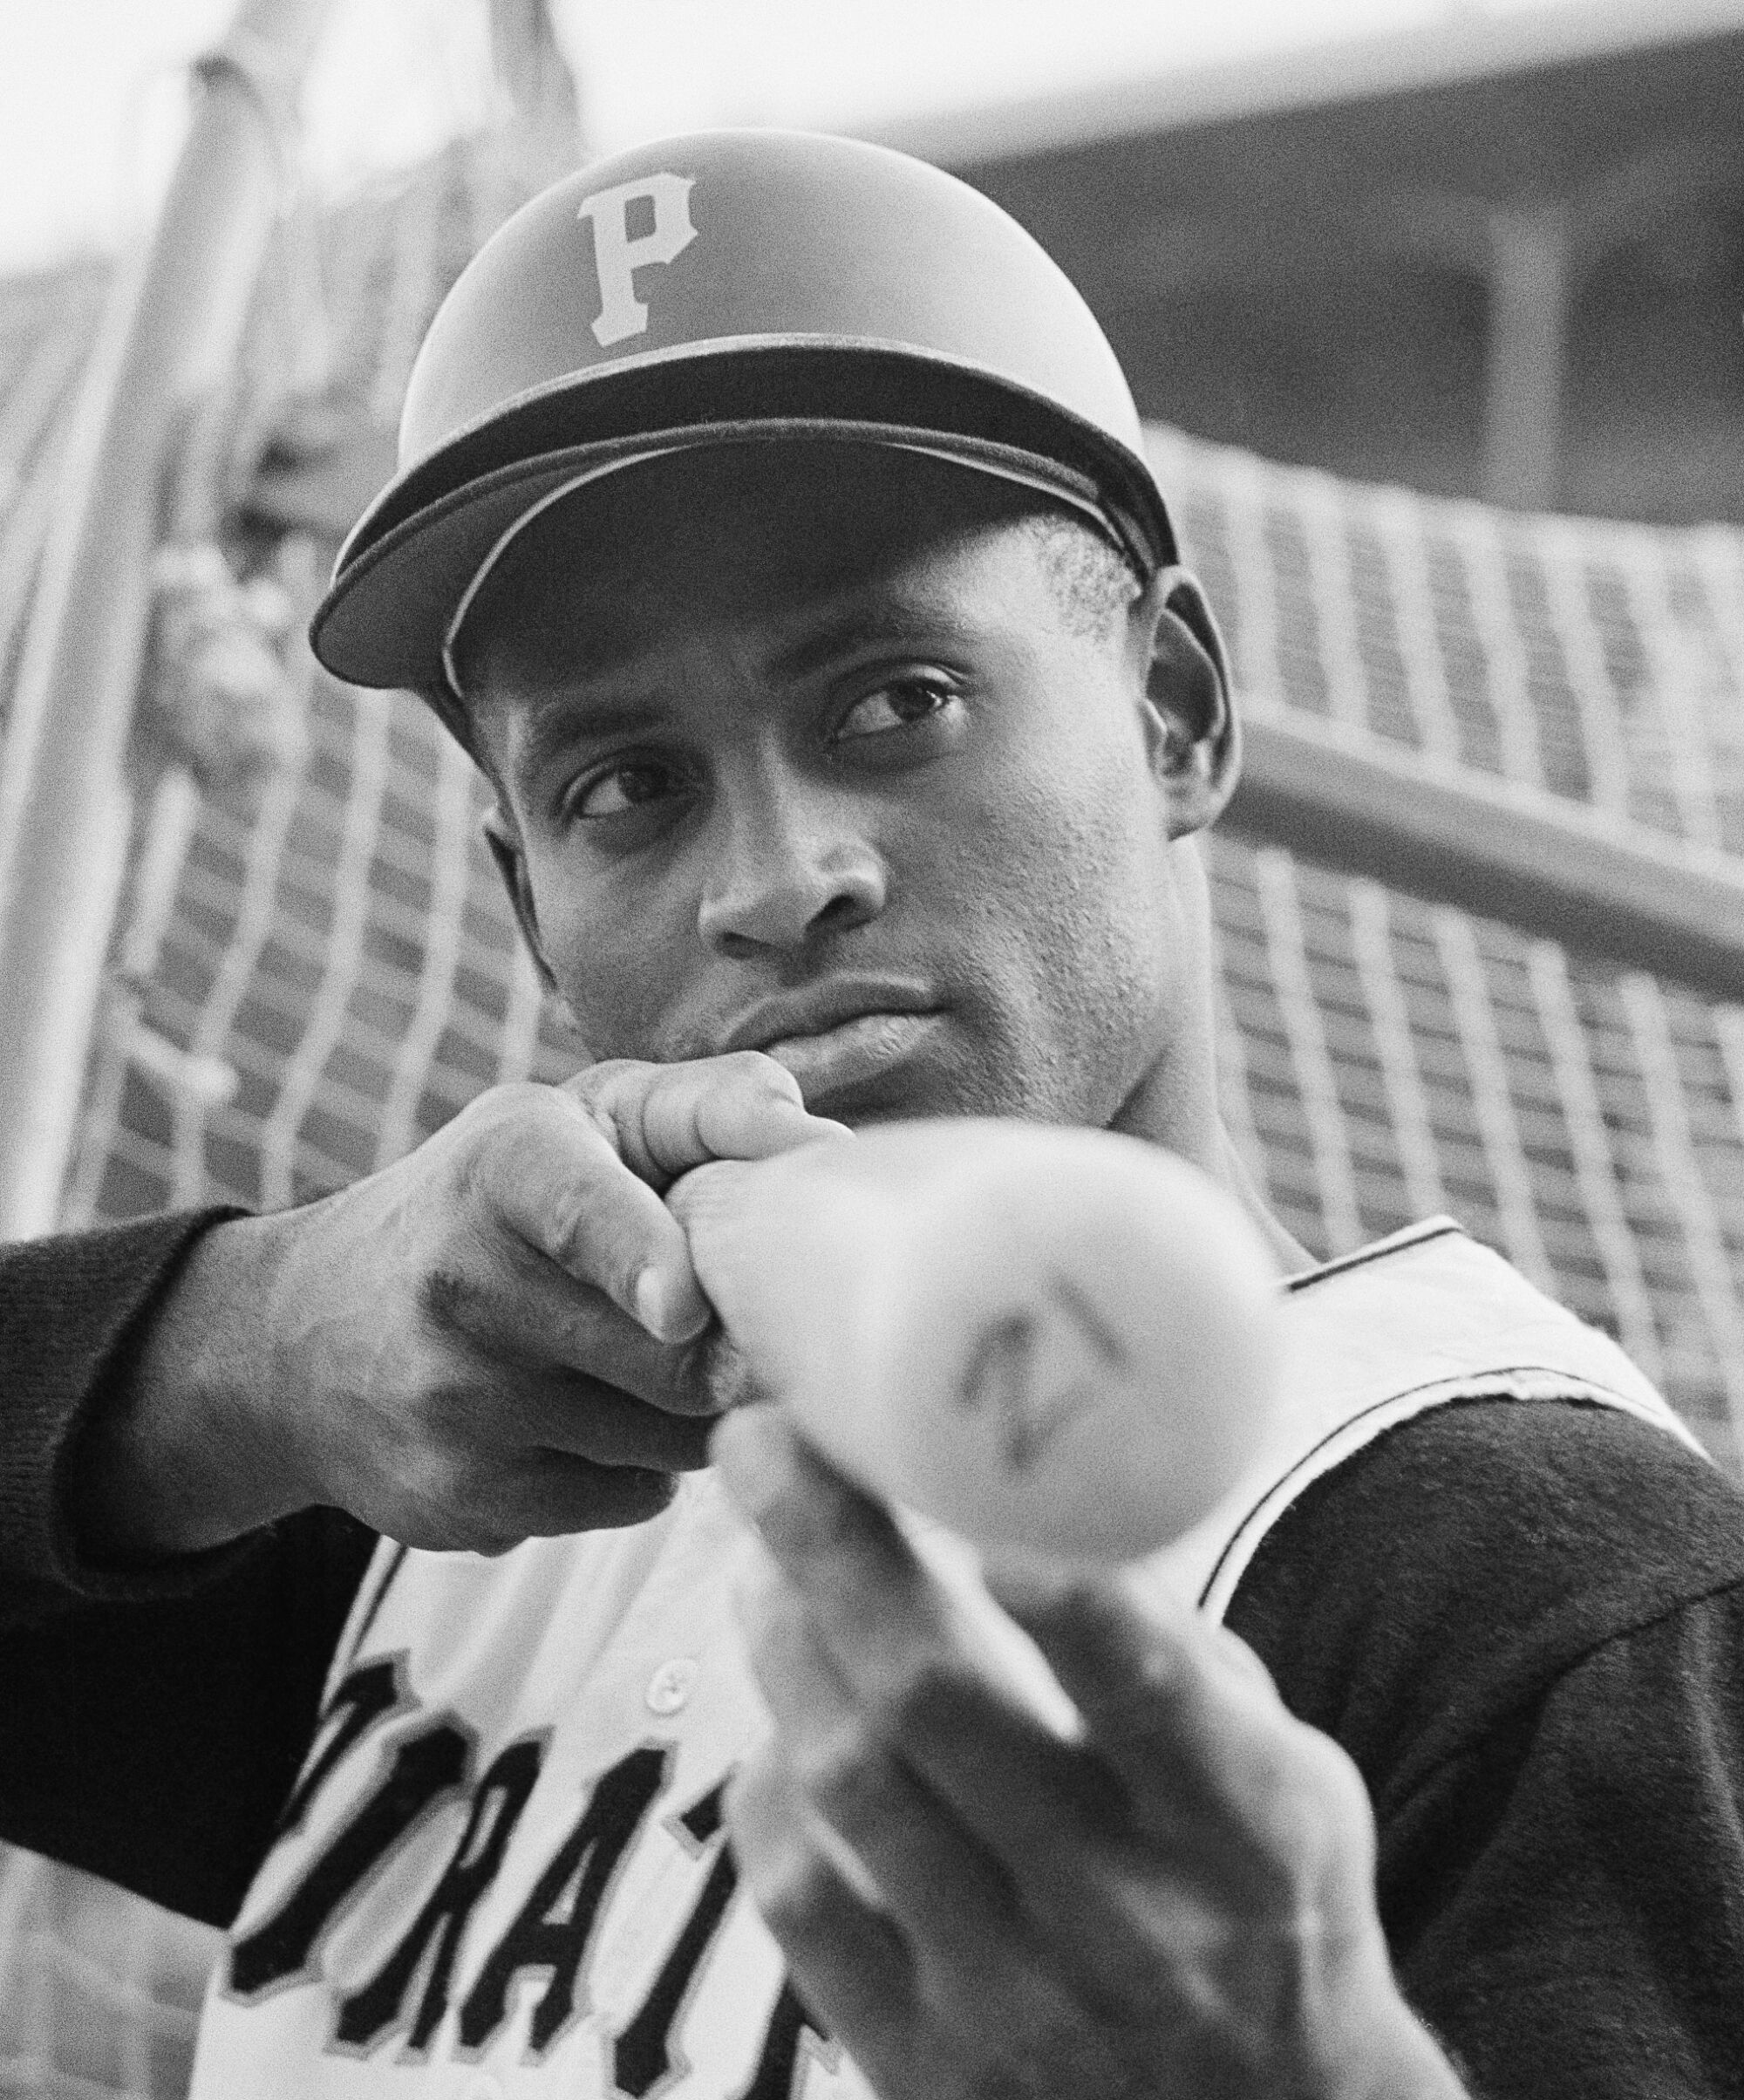 Roberto Clemente of the Pittsburgh, Prates Baseball team looks down a bat